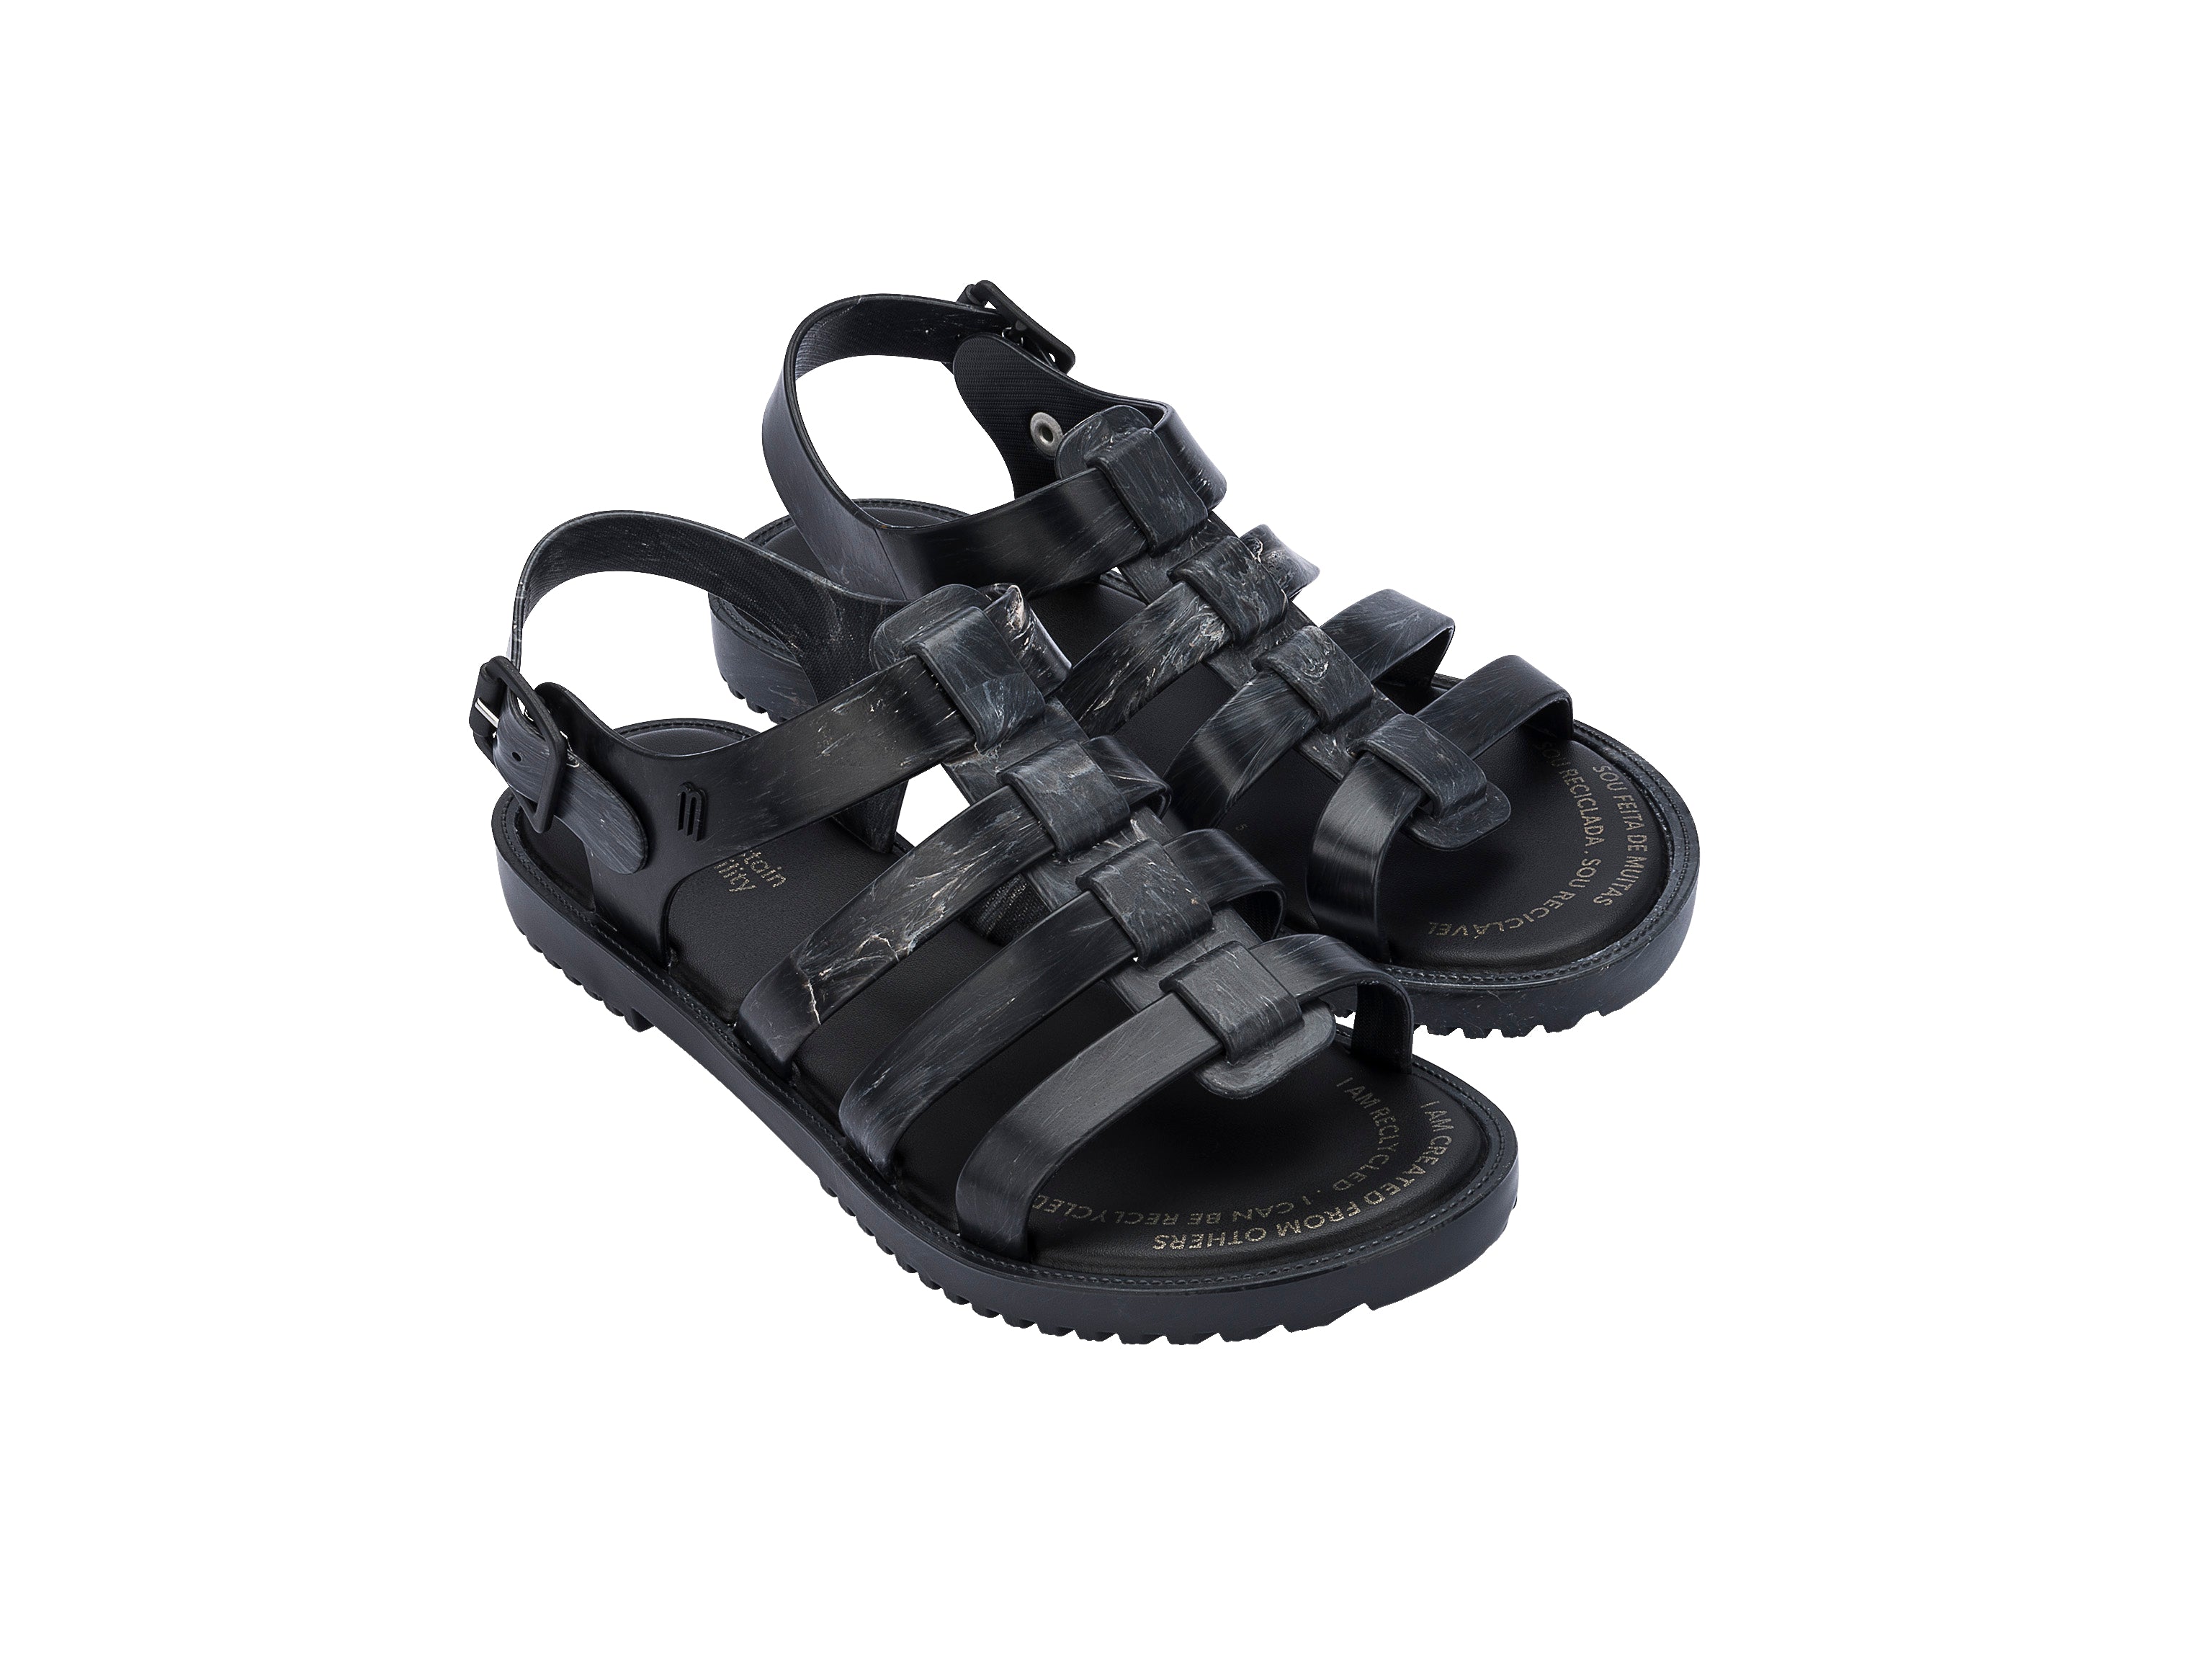 Recycled Flox Special Edition Sandal - Black